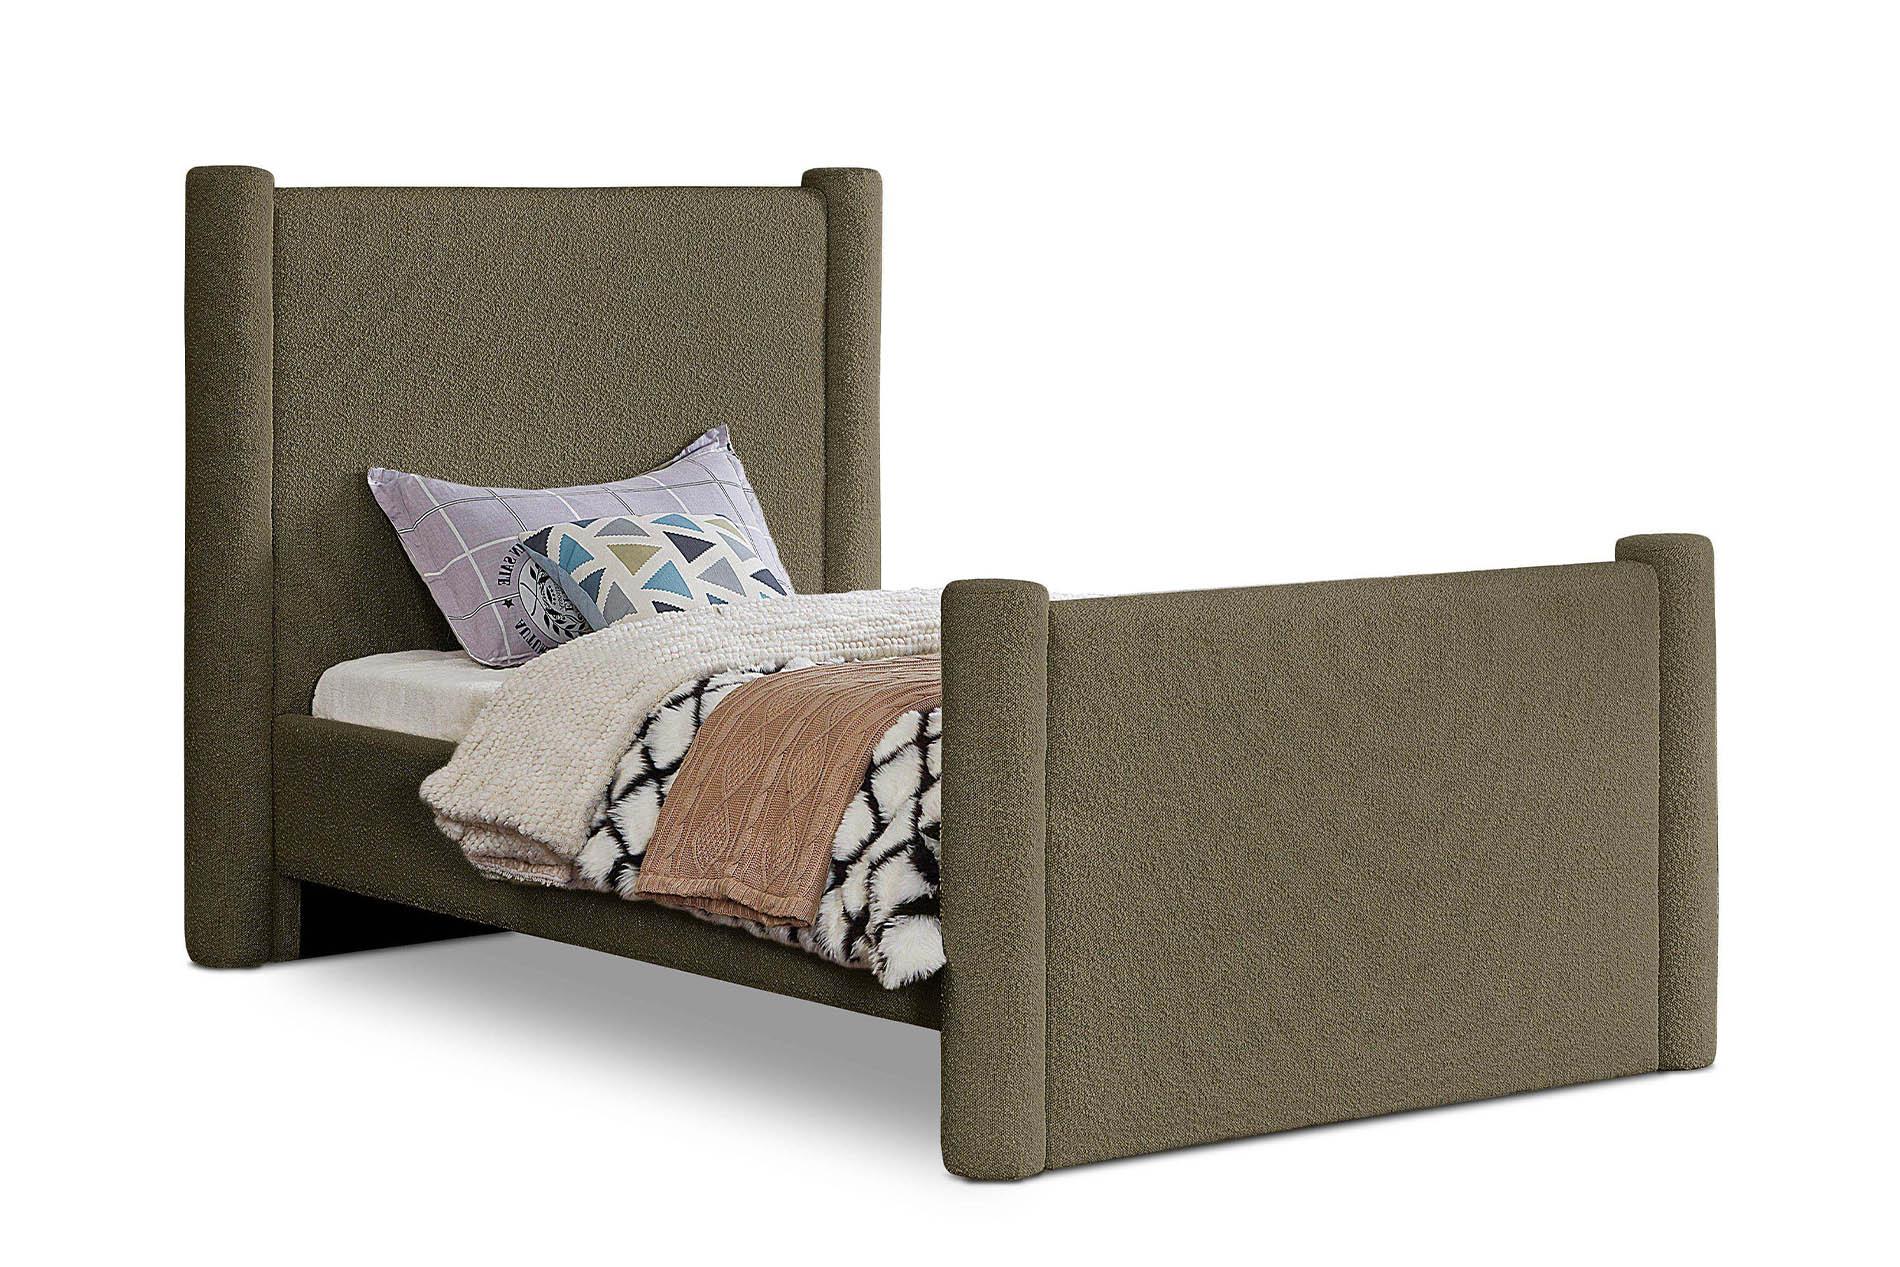 Contemporary, Modern Panel Bed ELIAS B1299Olive-T B1299Olive-T in Olive 